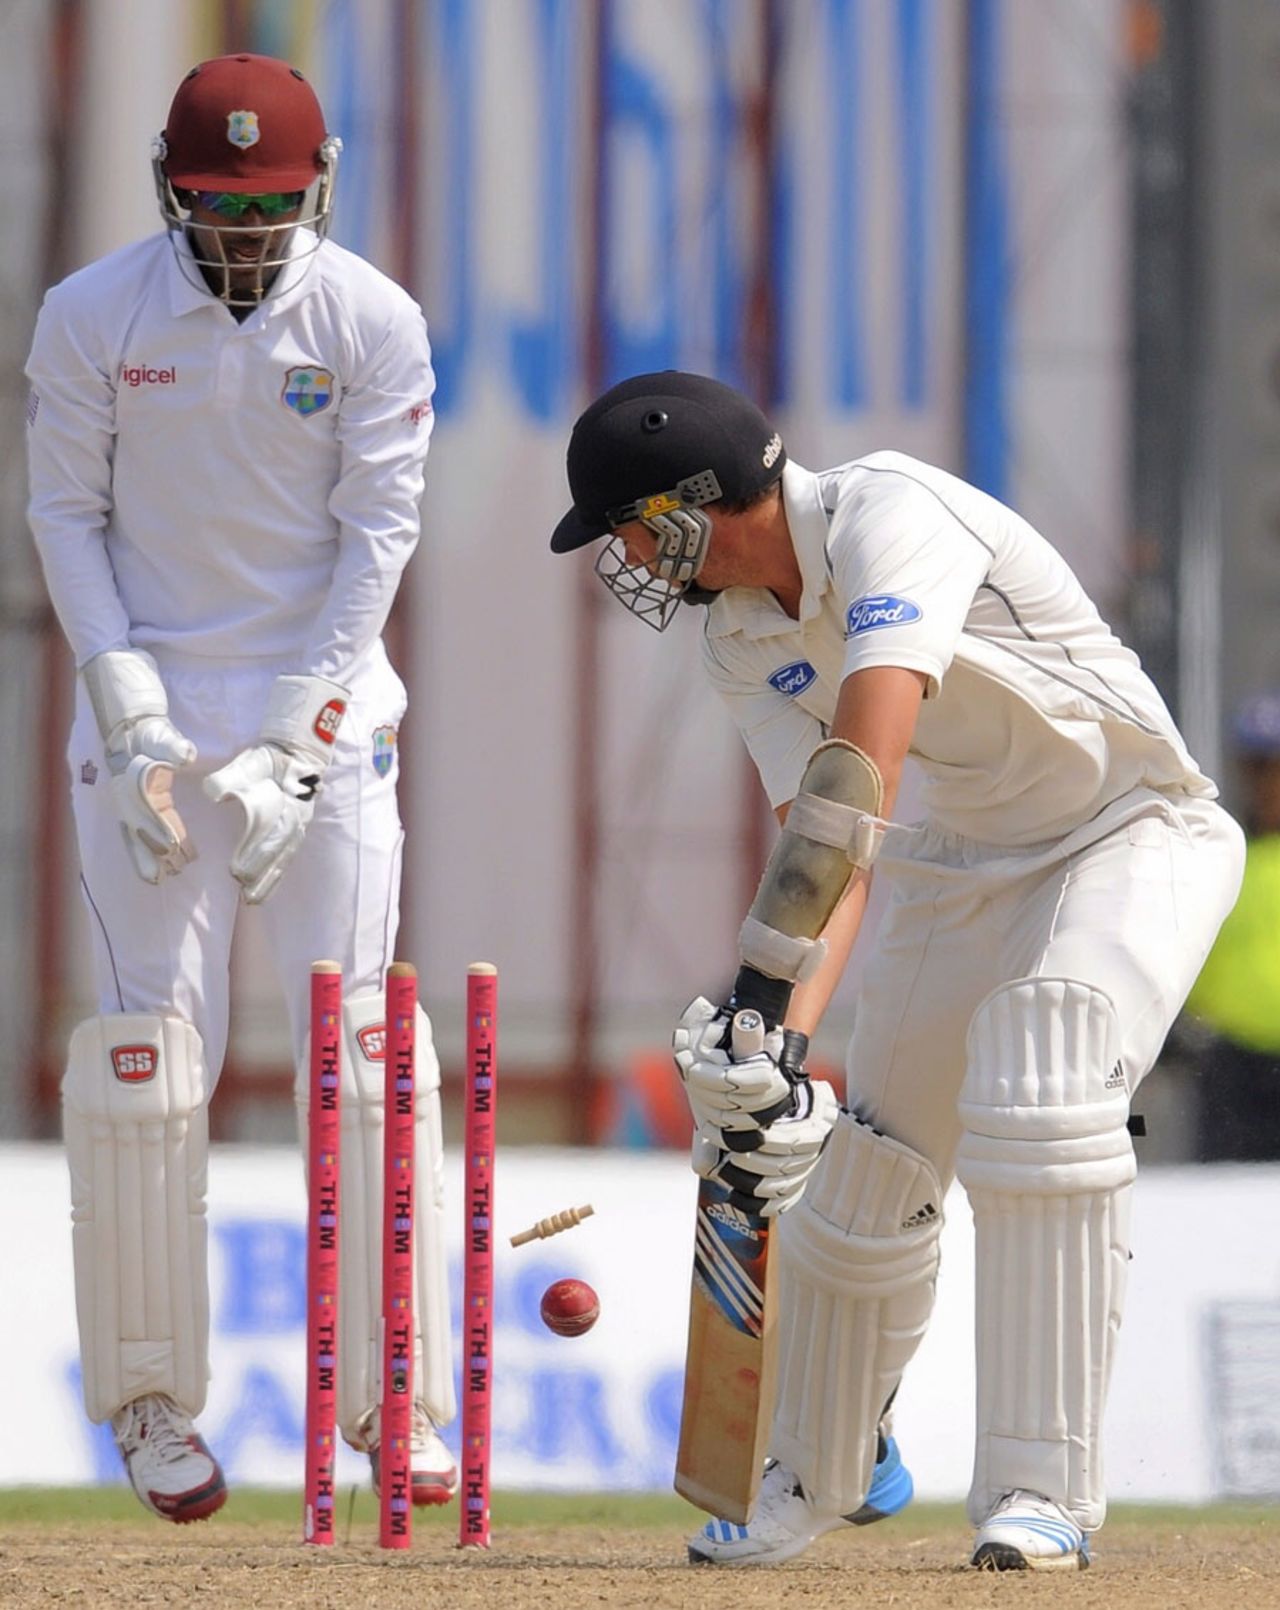 Tim Southee was bowled by Sulieman Benn, West Indies v New Zealand, 3rd Test, Bridgetown, 1st day, June 26, 2014